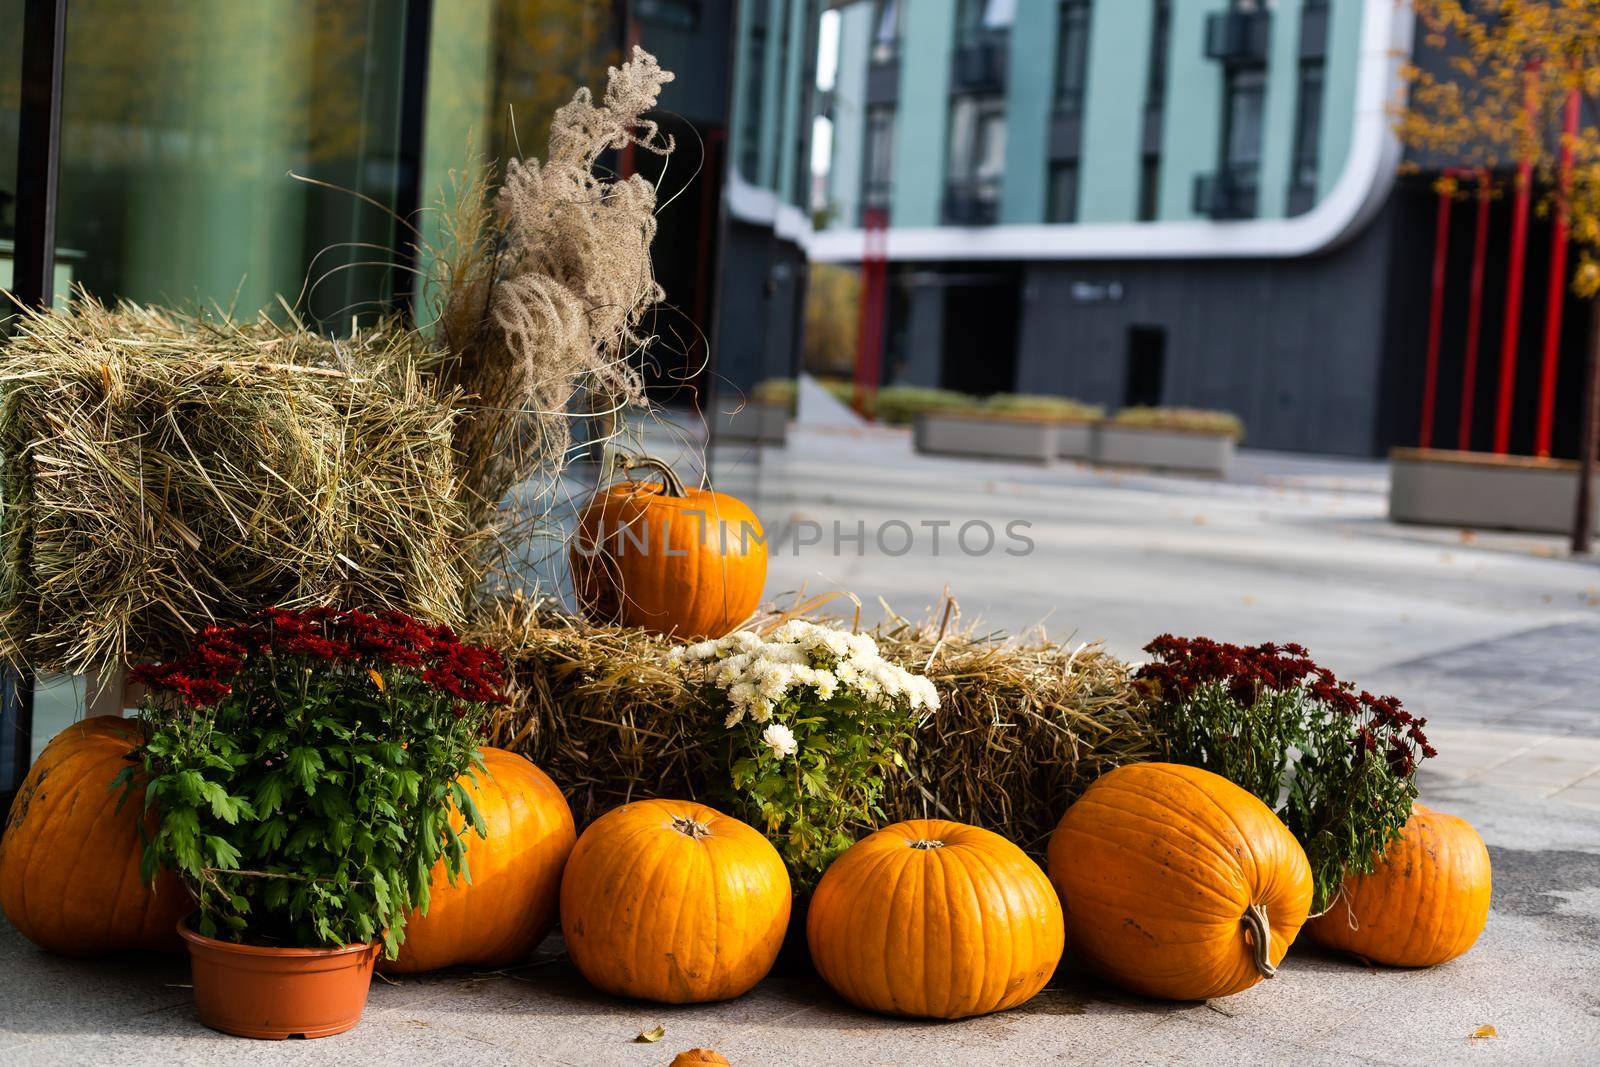 Halloween street decoration. Tiny orange pumpkins hanging on the rope. Florist's daisy flowers in a bucket. Autumn outdoor decorations made of pumpkins and flowers